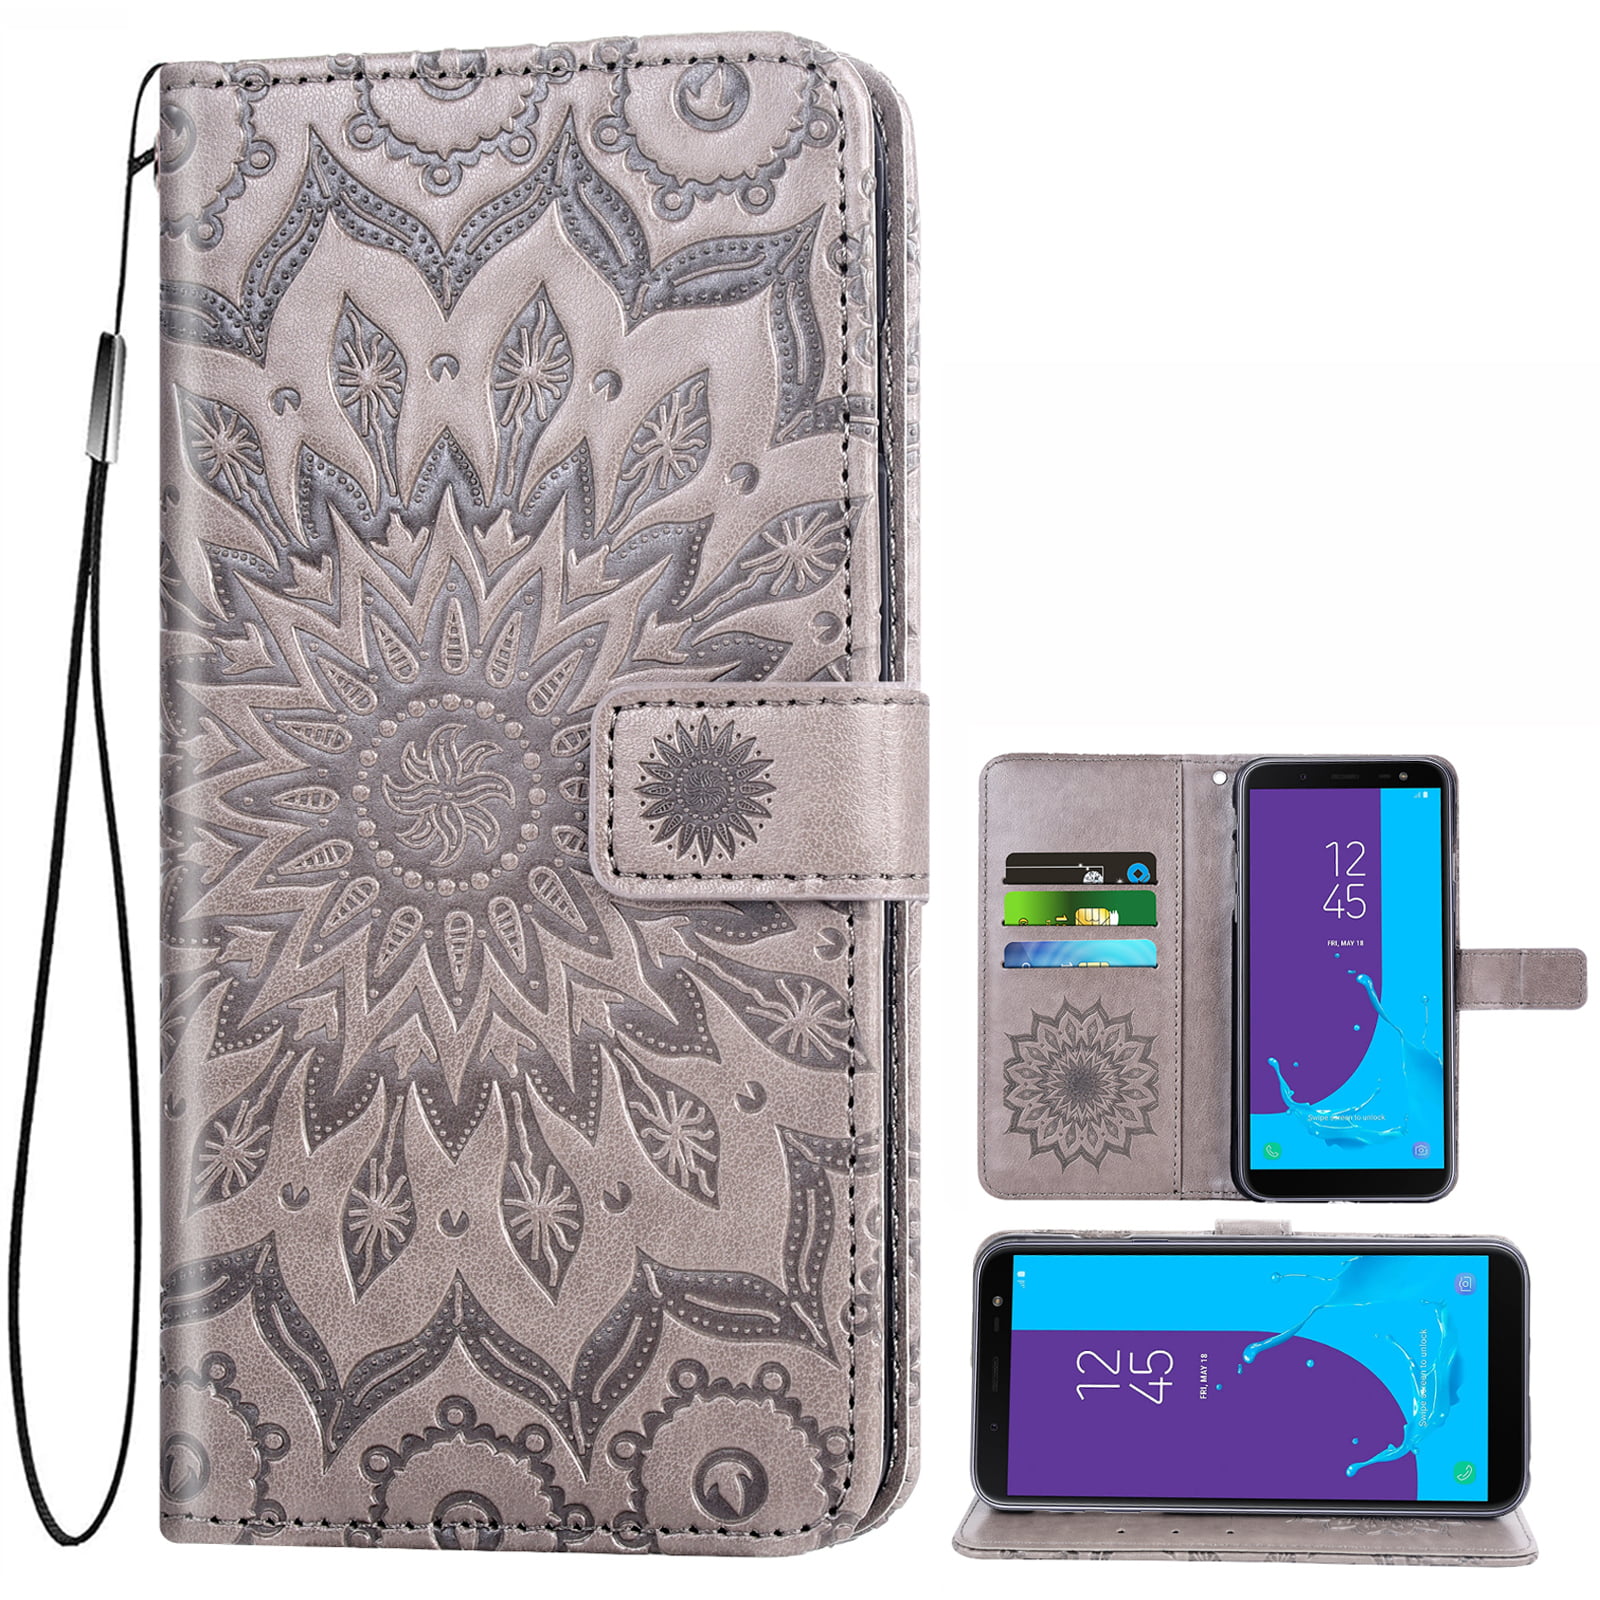 Women Vintage embossing leather Wristlet Galaxy S8 S8 plus wallet cover plus wallet case phone wallet/leather Galaxy S8 S8 